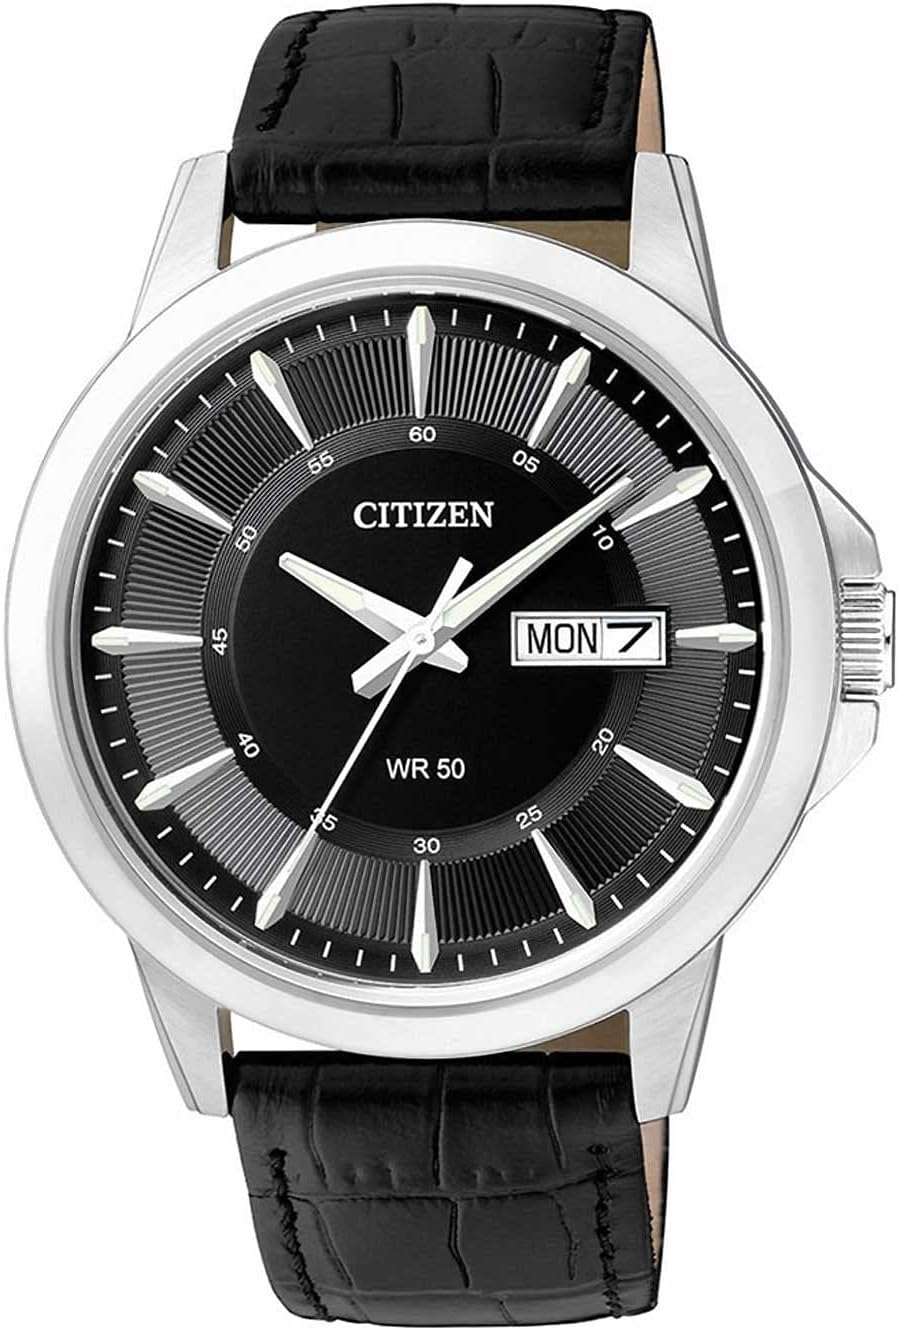 Citizen Mens Quartz Watch, Analog Display and Leather Strap BF2011-01EE